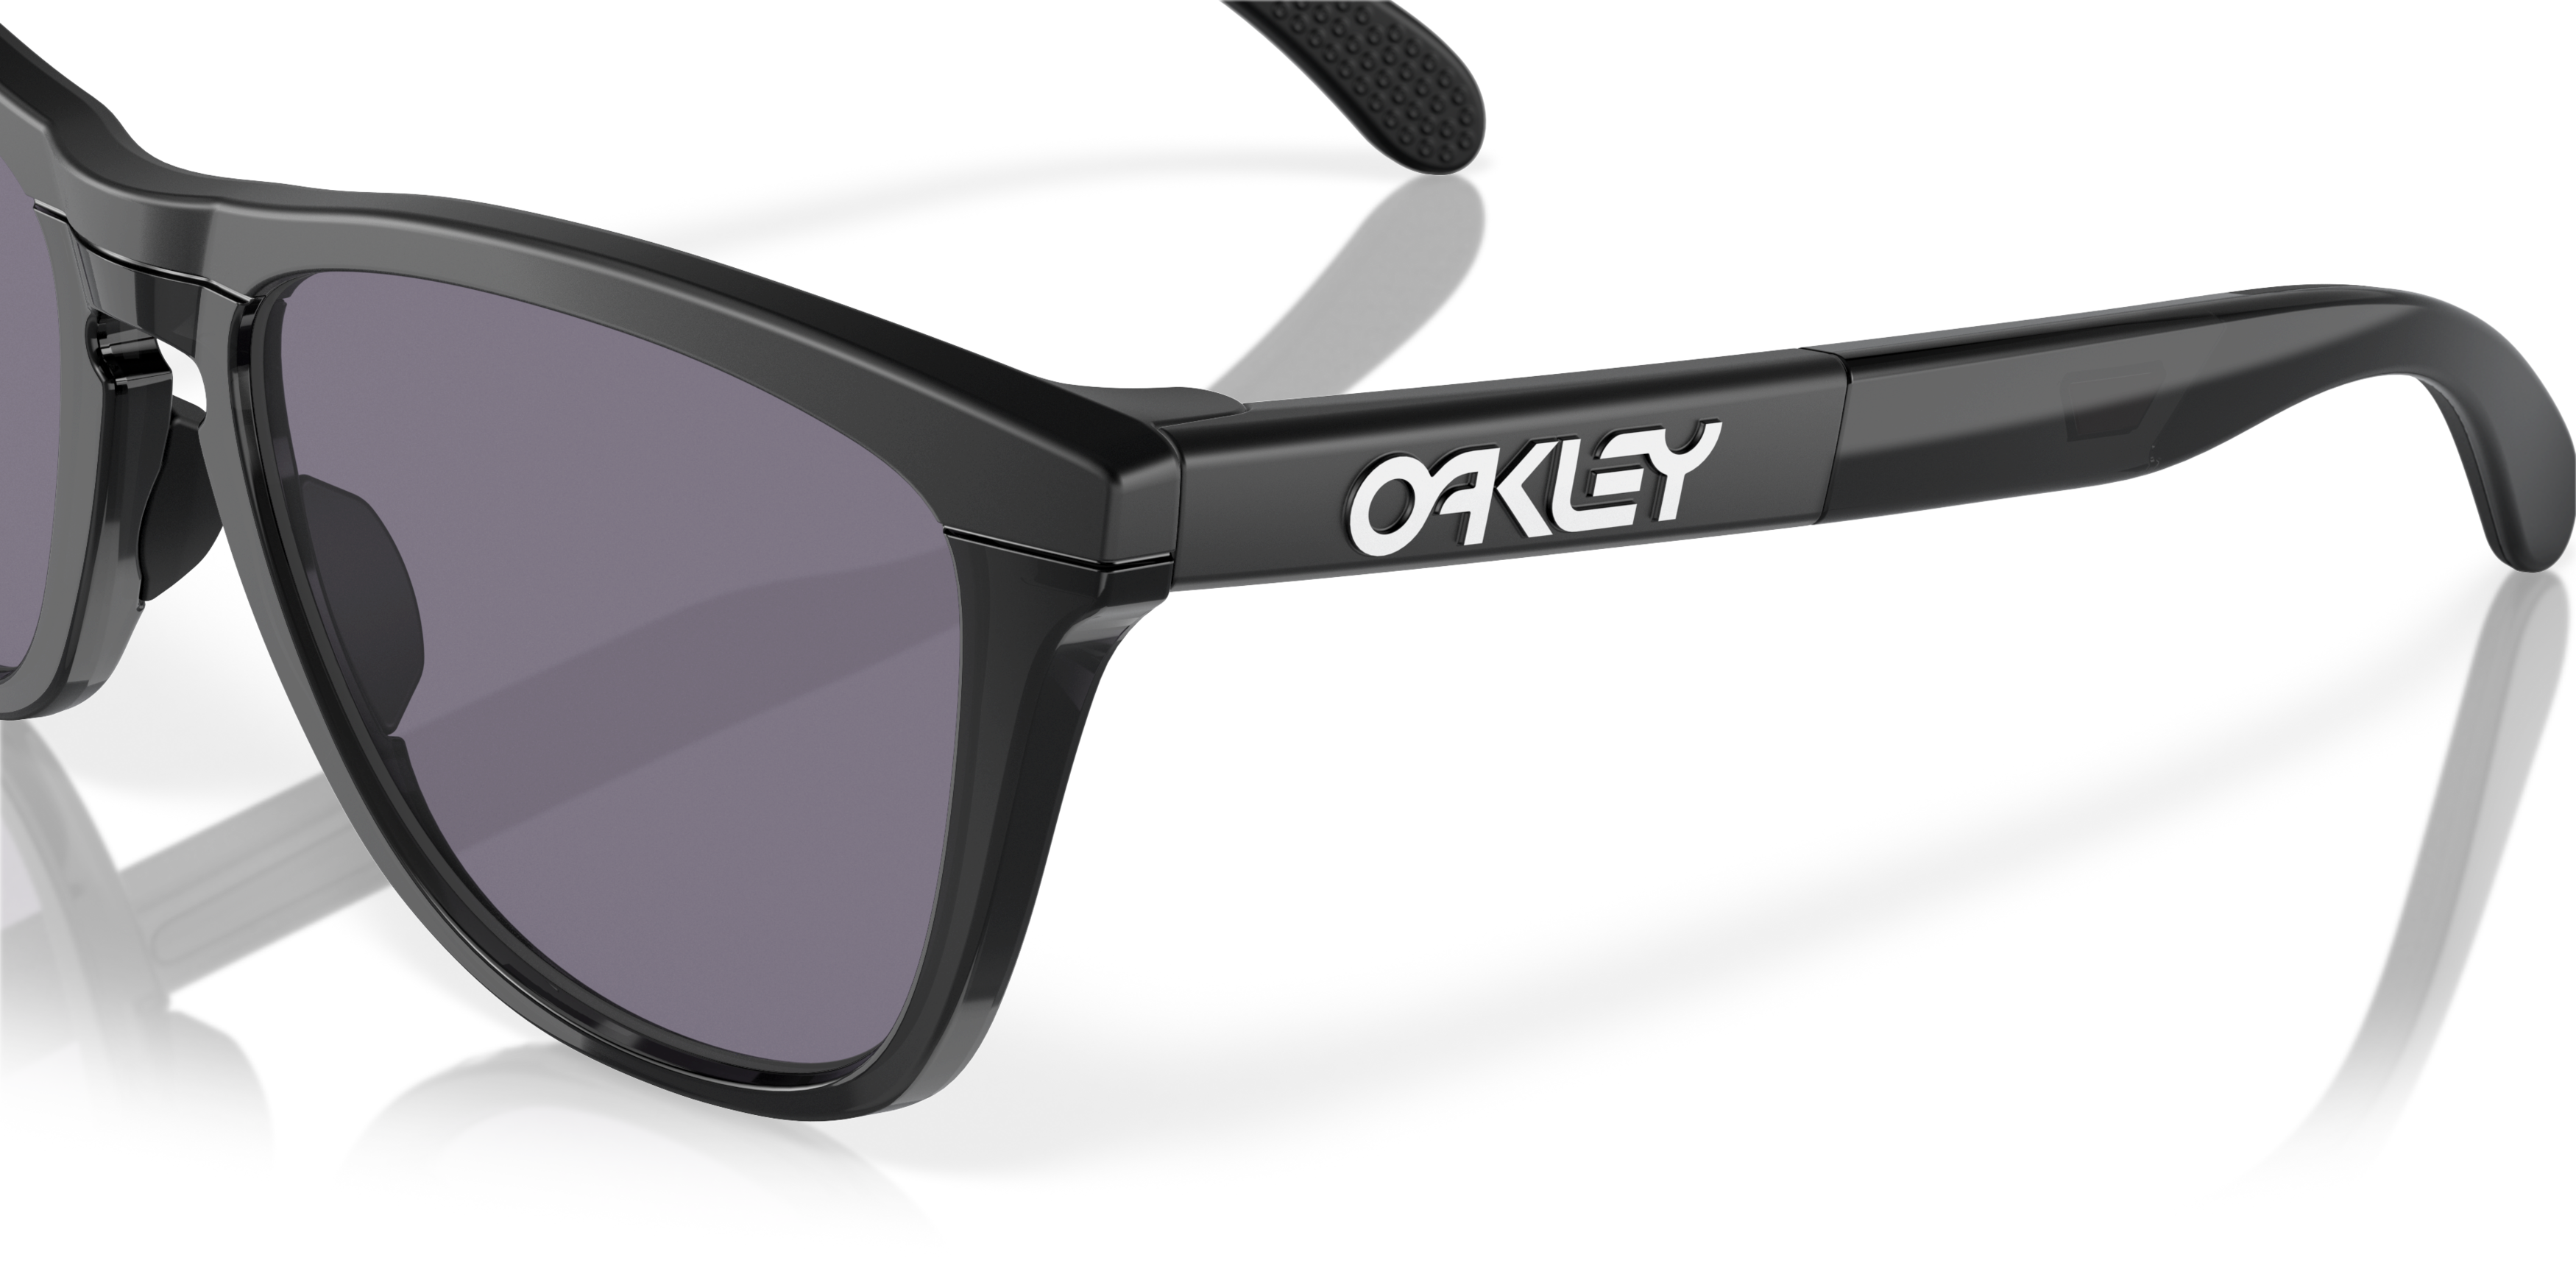 [products.image.detail01] OAKLEY OO9284 928411